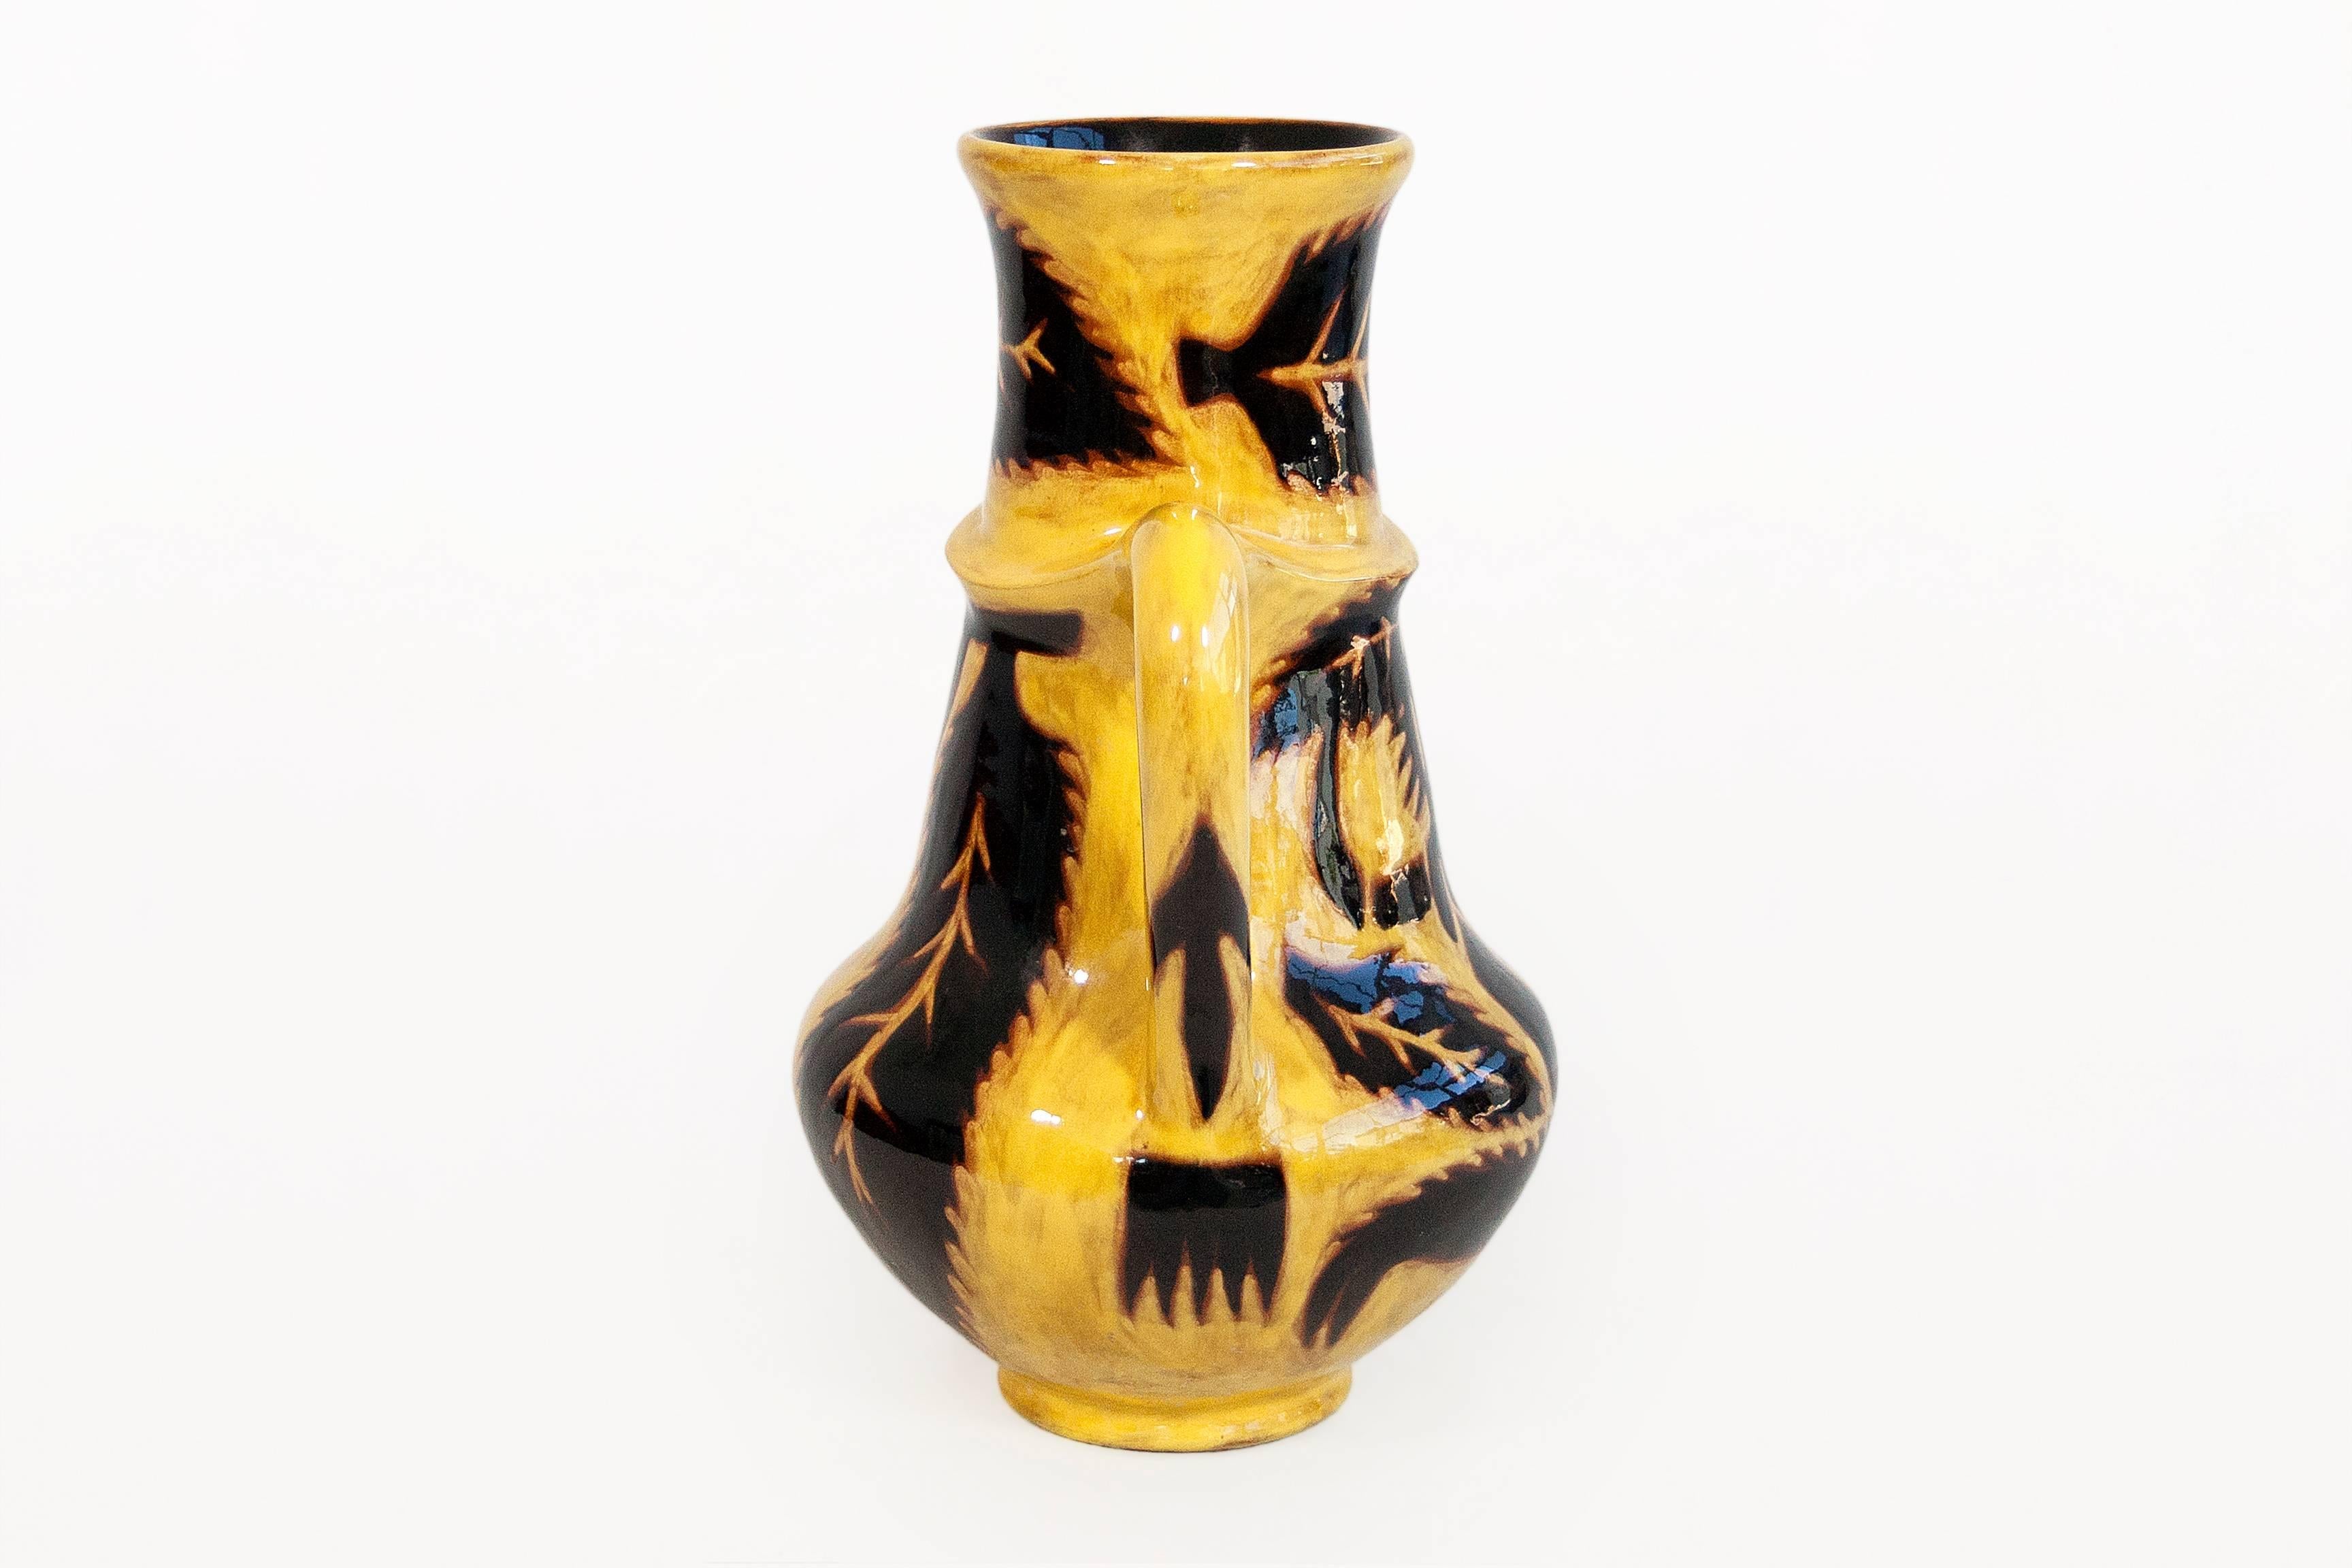 Glazed Very Large Yellow Vase by Jean Lurçat for Sant Vincens, circa 1950, France